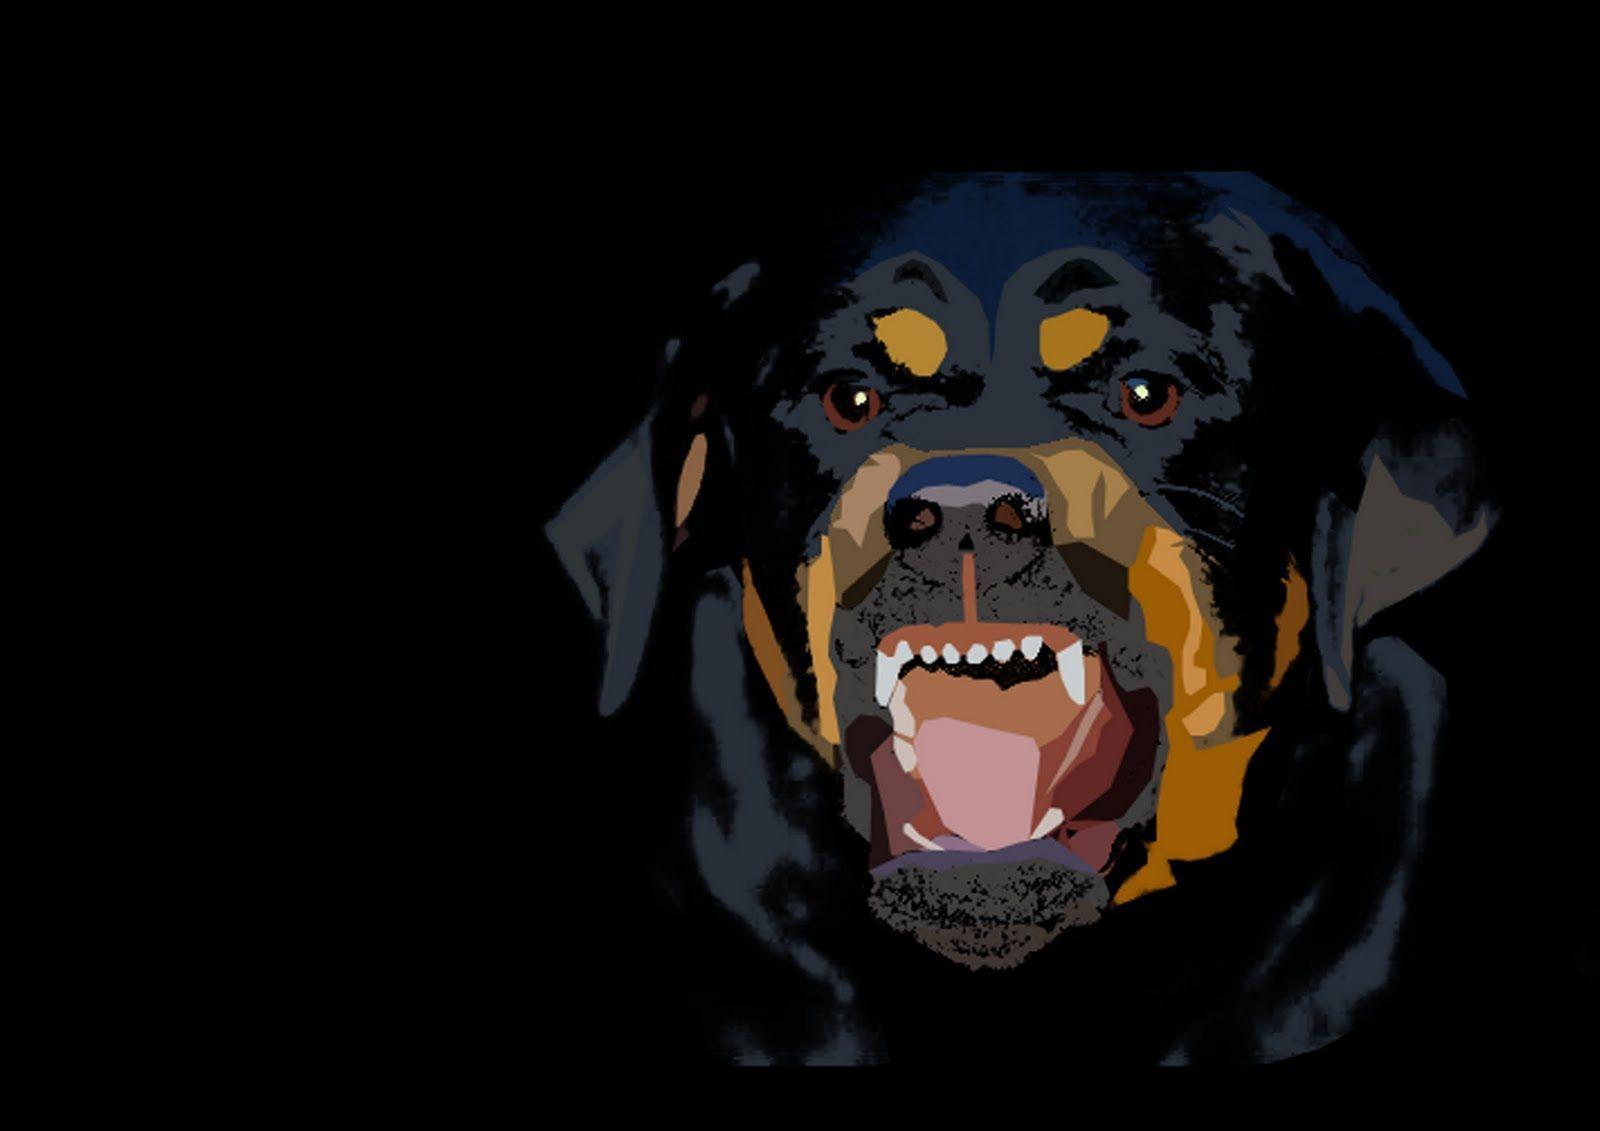 Wallpaper For > Givenchy Rottweiler Wallpaper